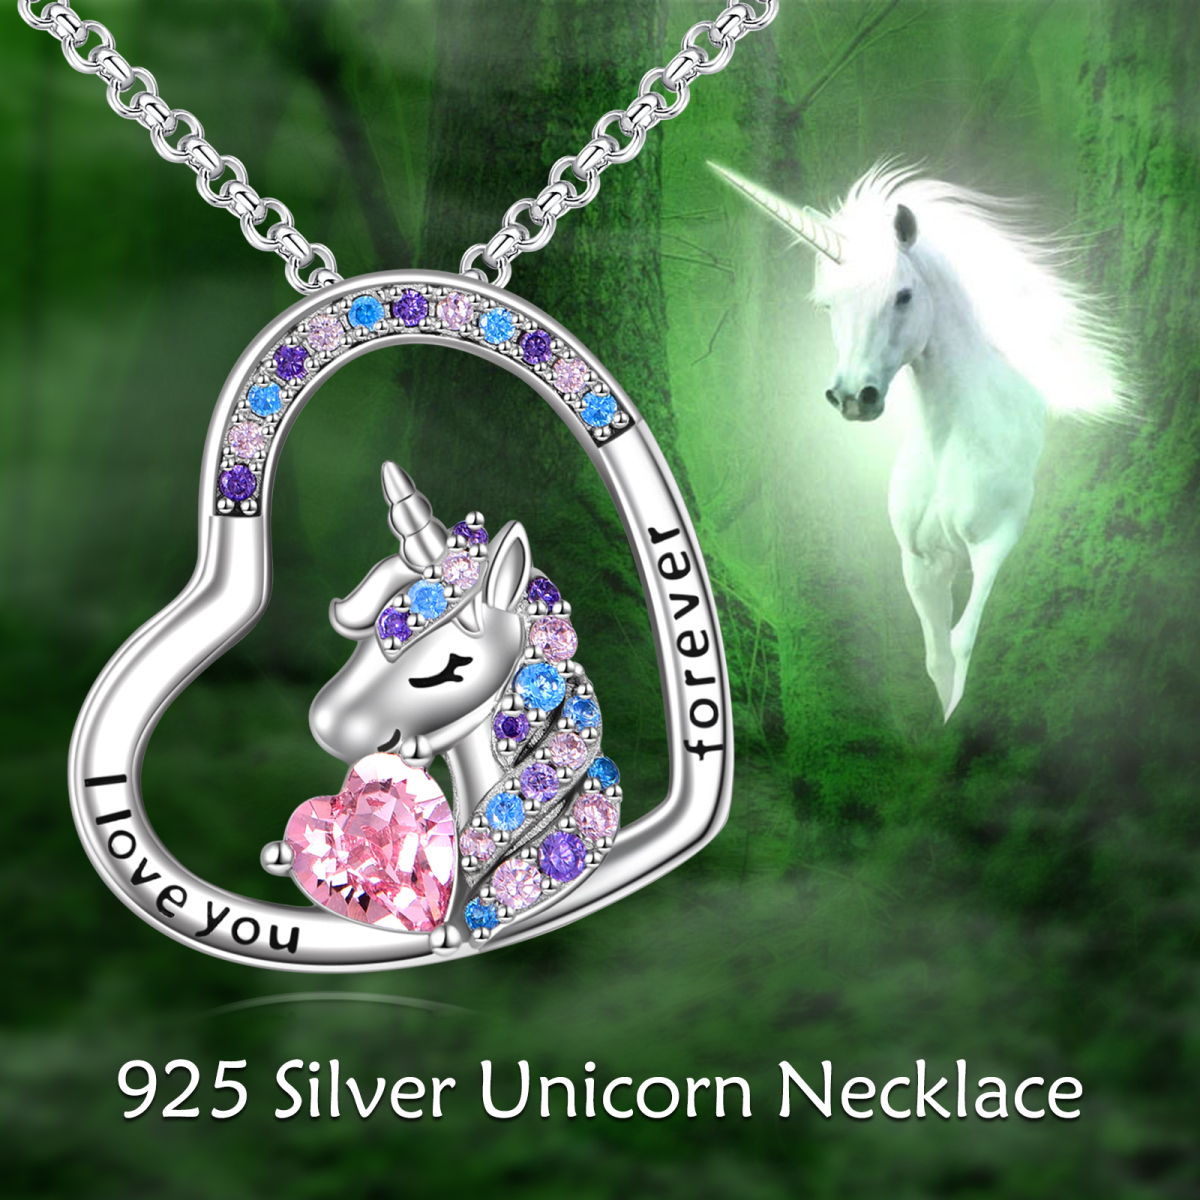 Sterling Silver Circular Shaped & Heart Shaped Cubic Zirconia Unicorn Pendant Necklace with Engraved Word-6